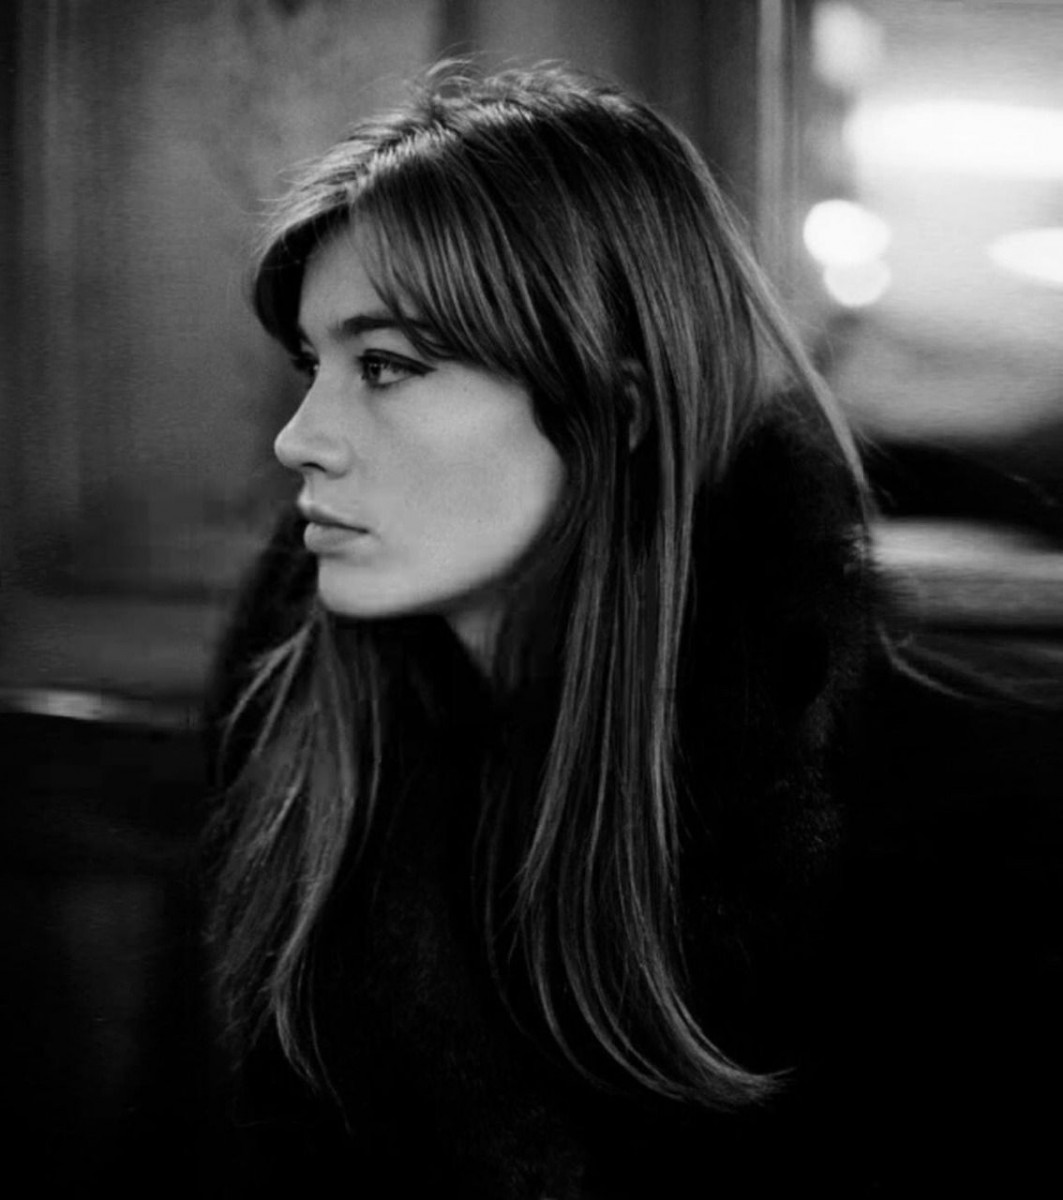 Francoise Hardy photo 28 of 31 pics, wallpaper - photo #1326499 - ThePlace2